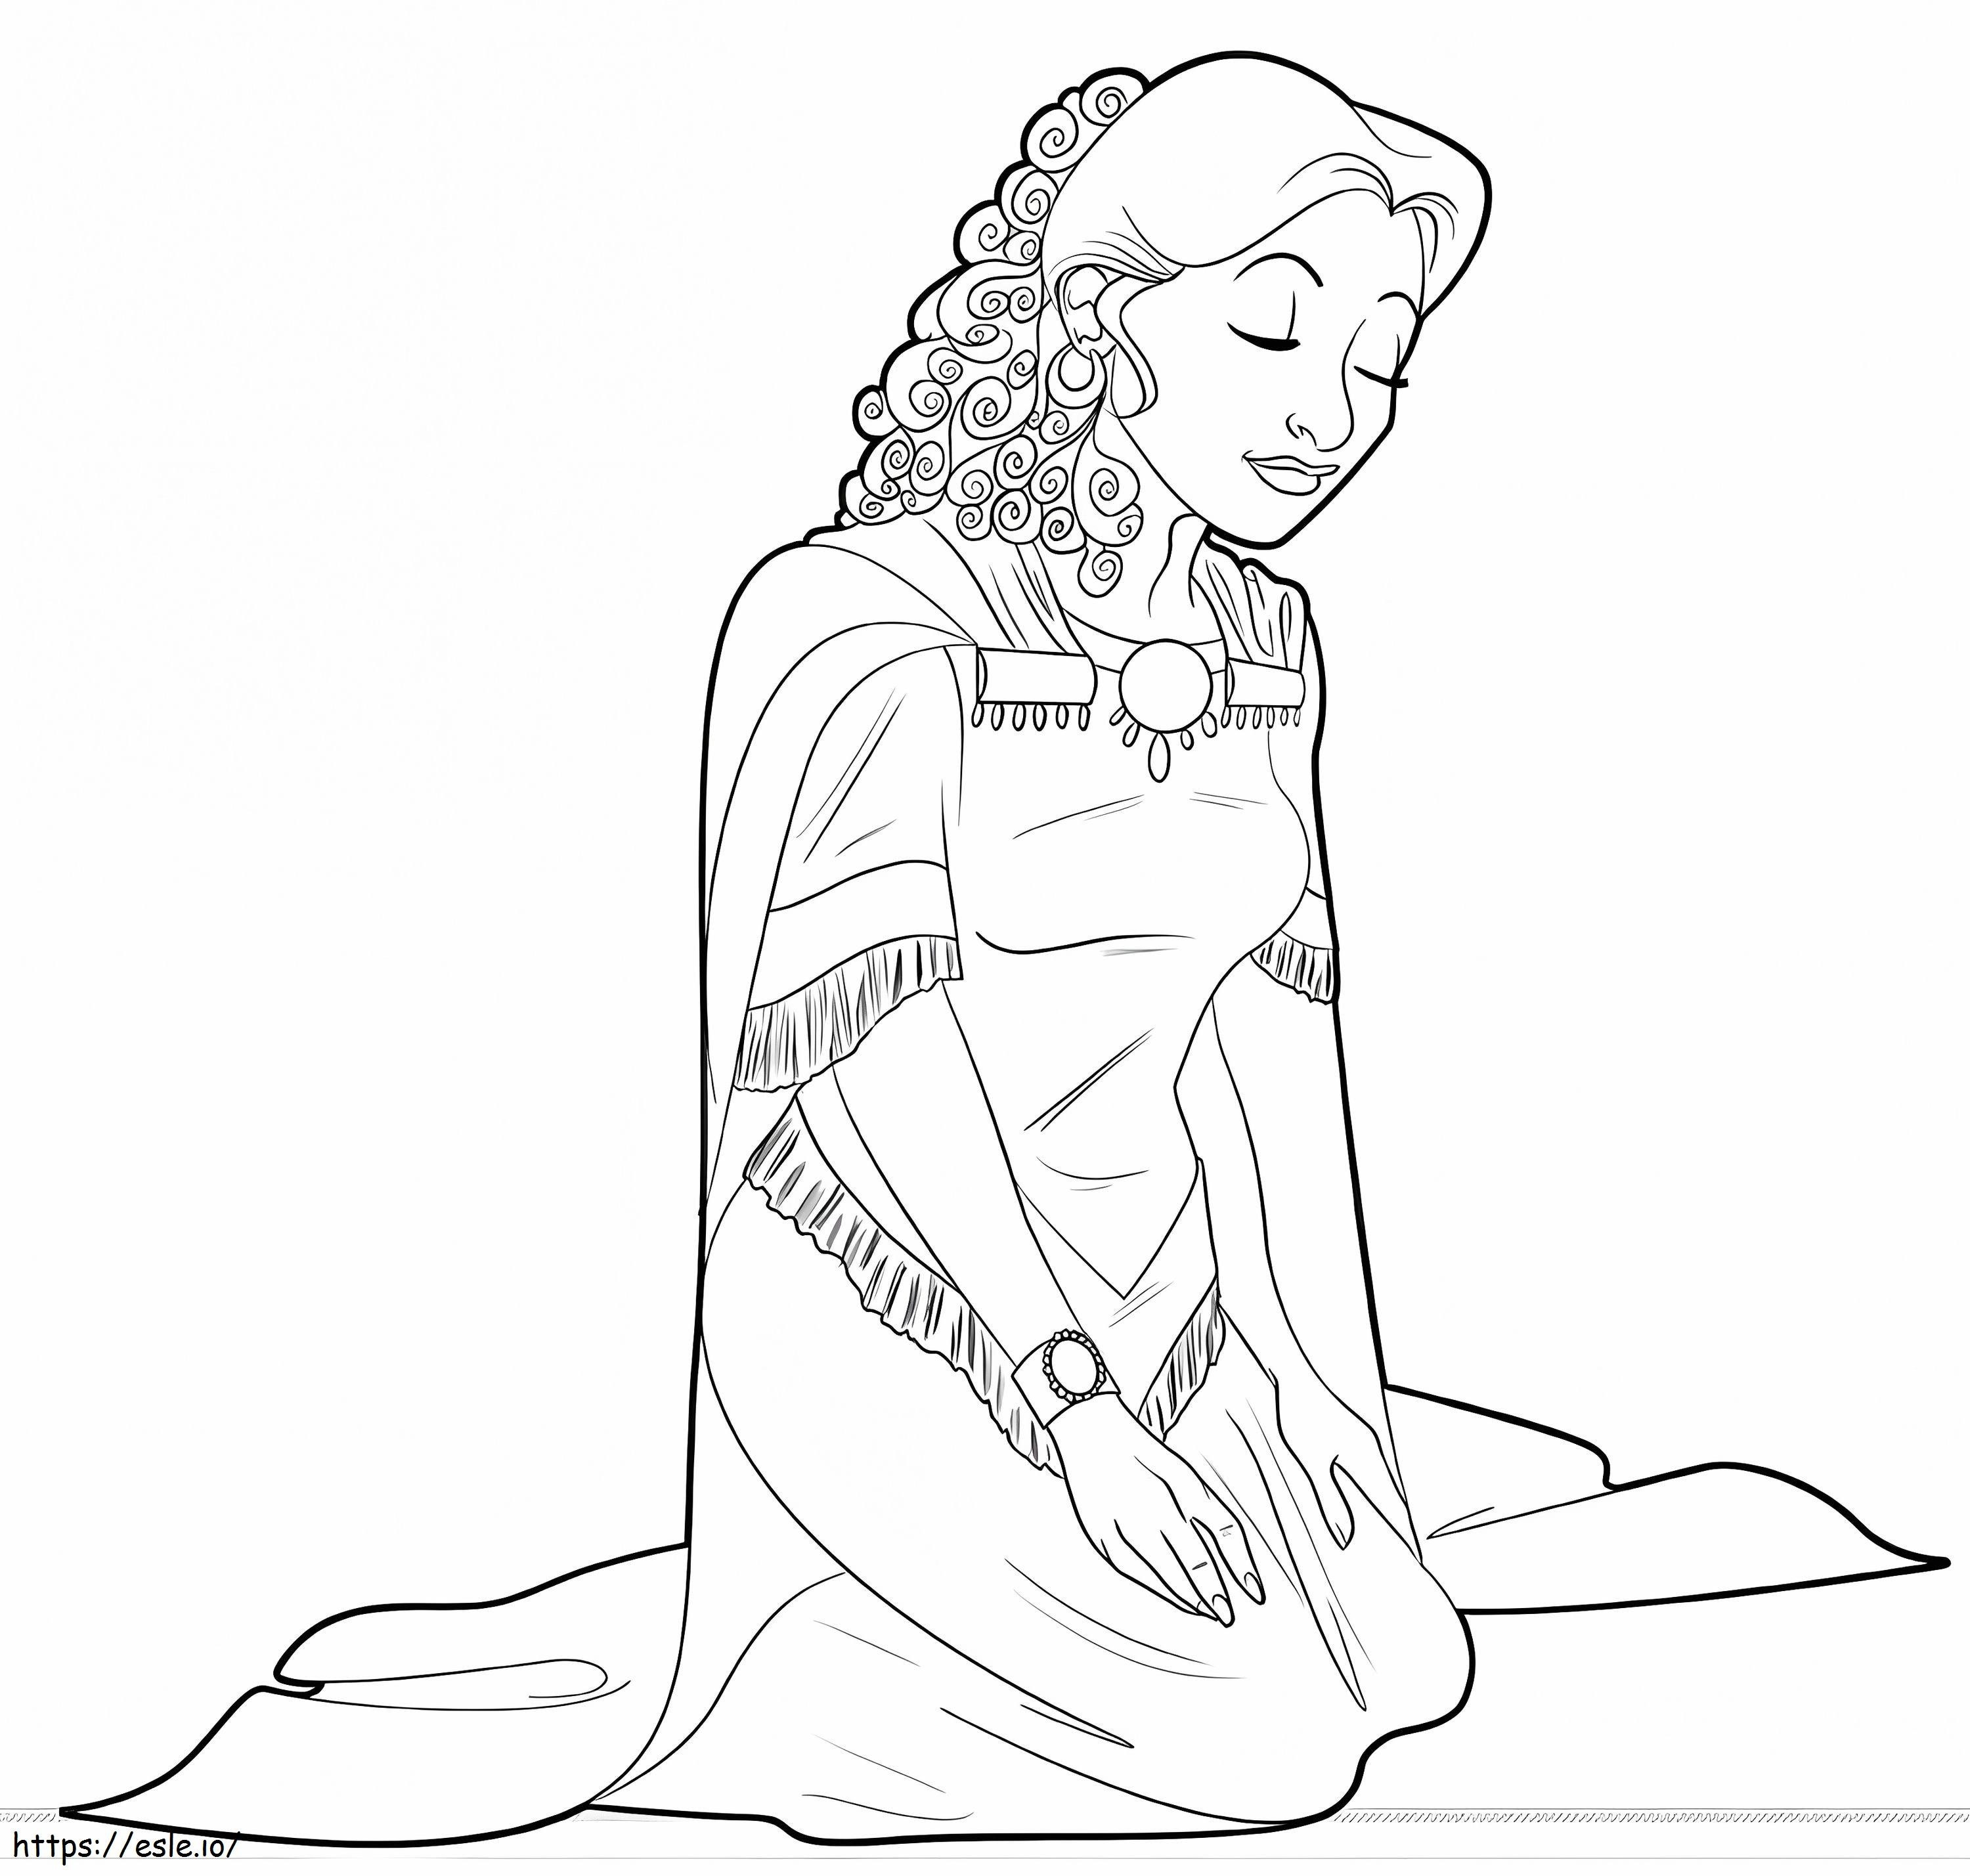 Queen esther printable coloring page